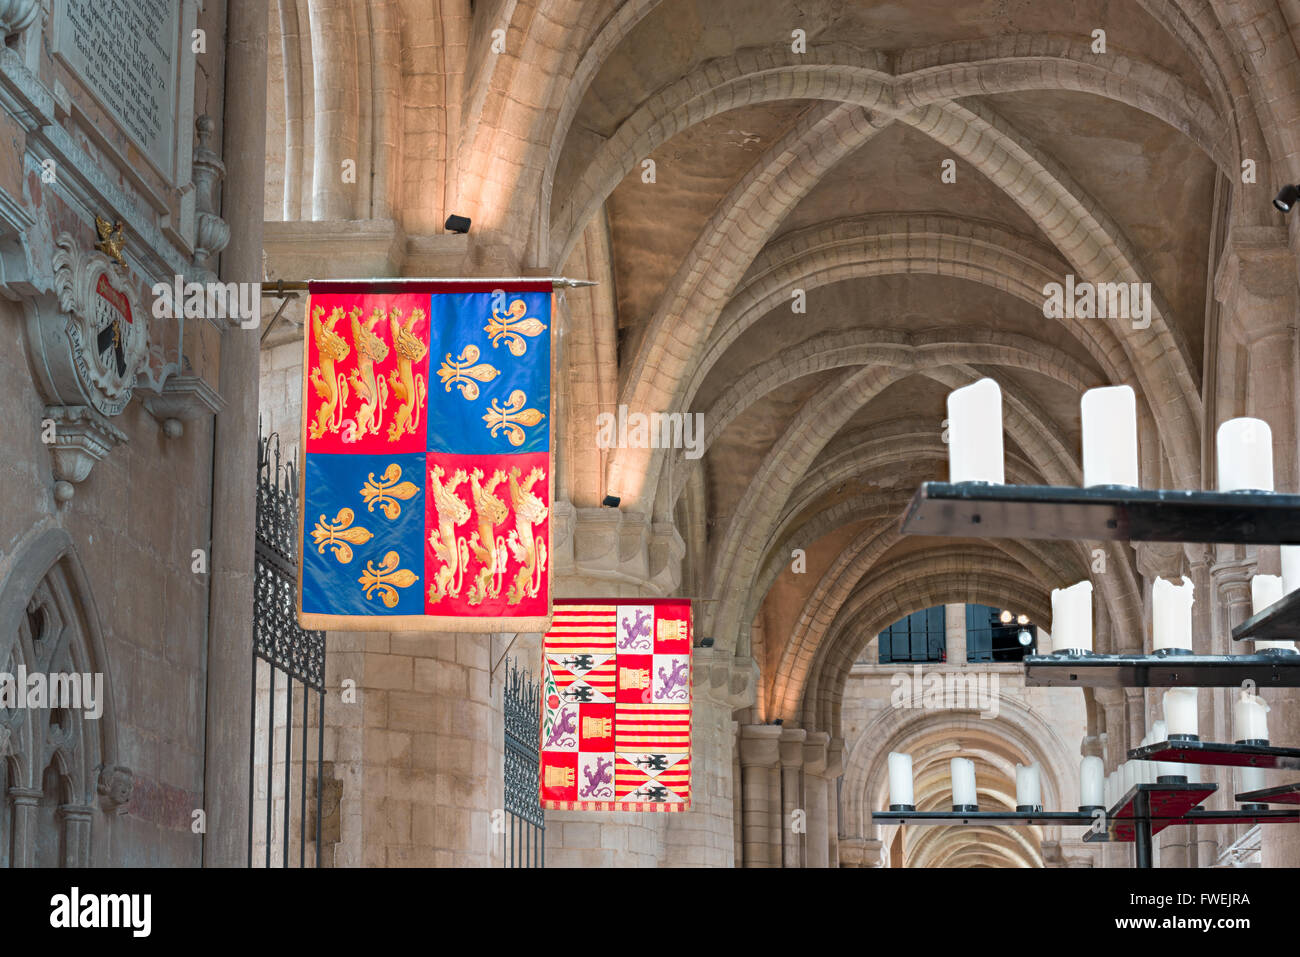 Royal flags (of England and Castile & Leon) above the tomb of Queen Catherine from Aragon, the first wife of king Henry VIII. Stock Photo